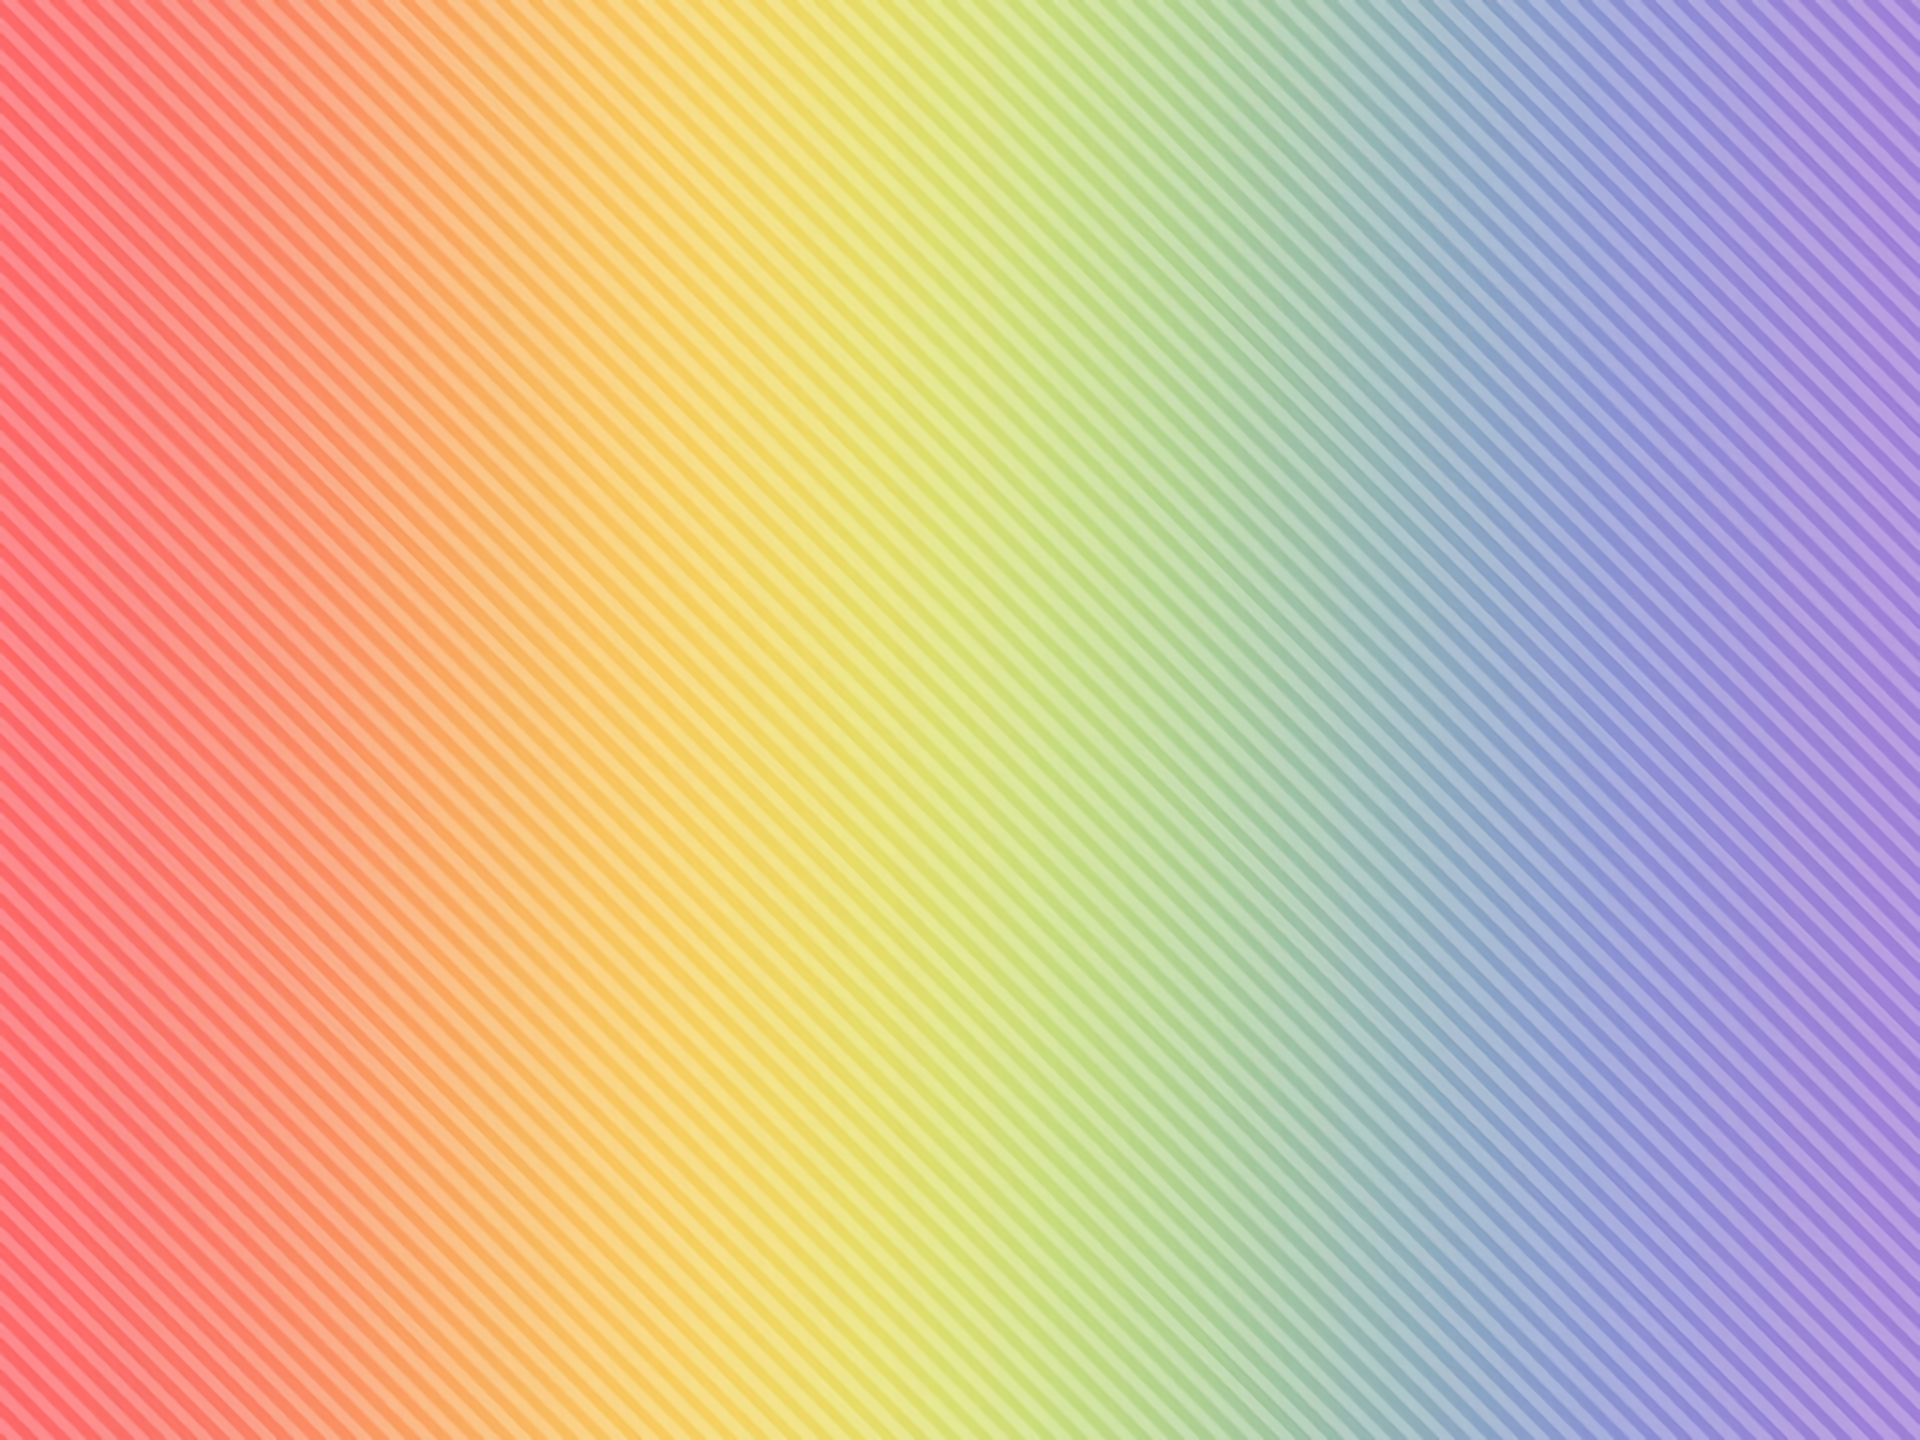 Colorful rainbow gradient lines and stripes create a vibrant pattern in this high-definition desktop wallpaper.